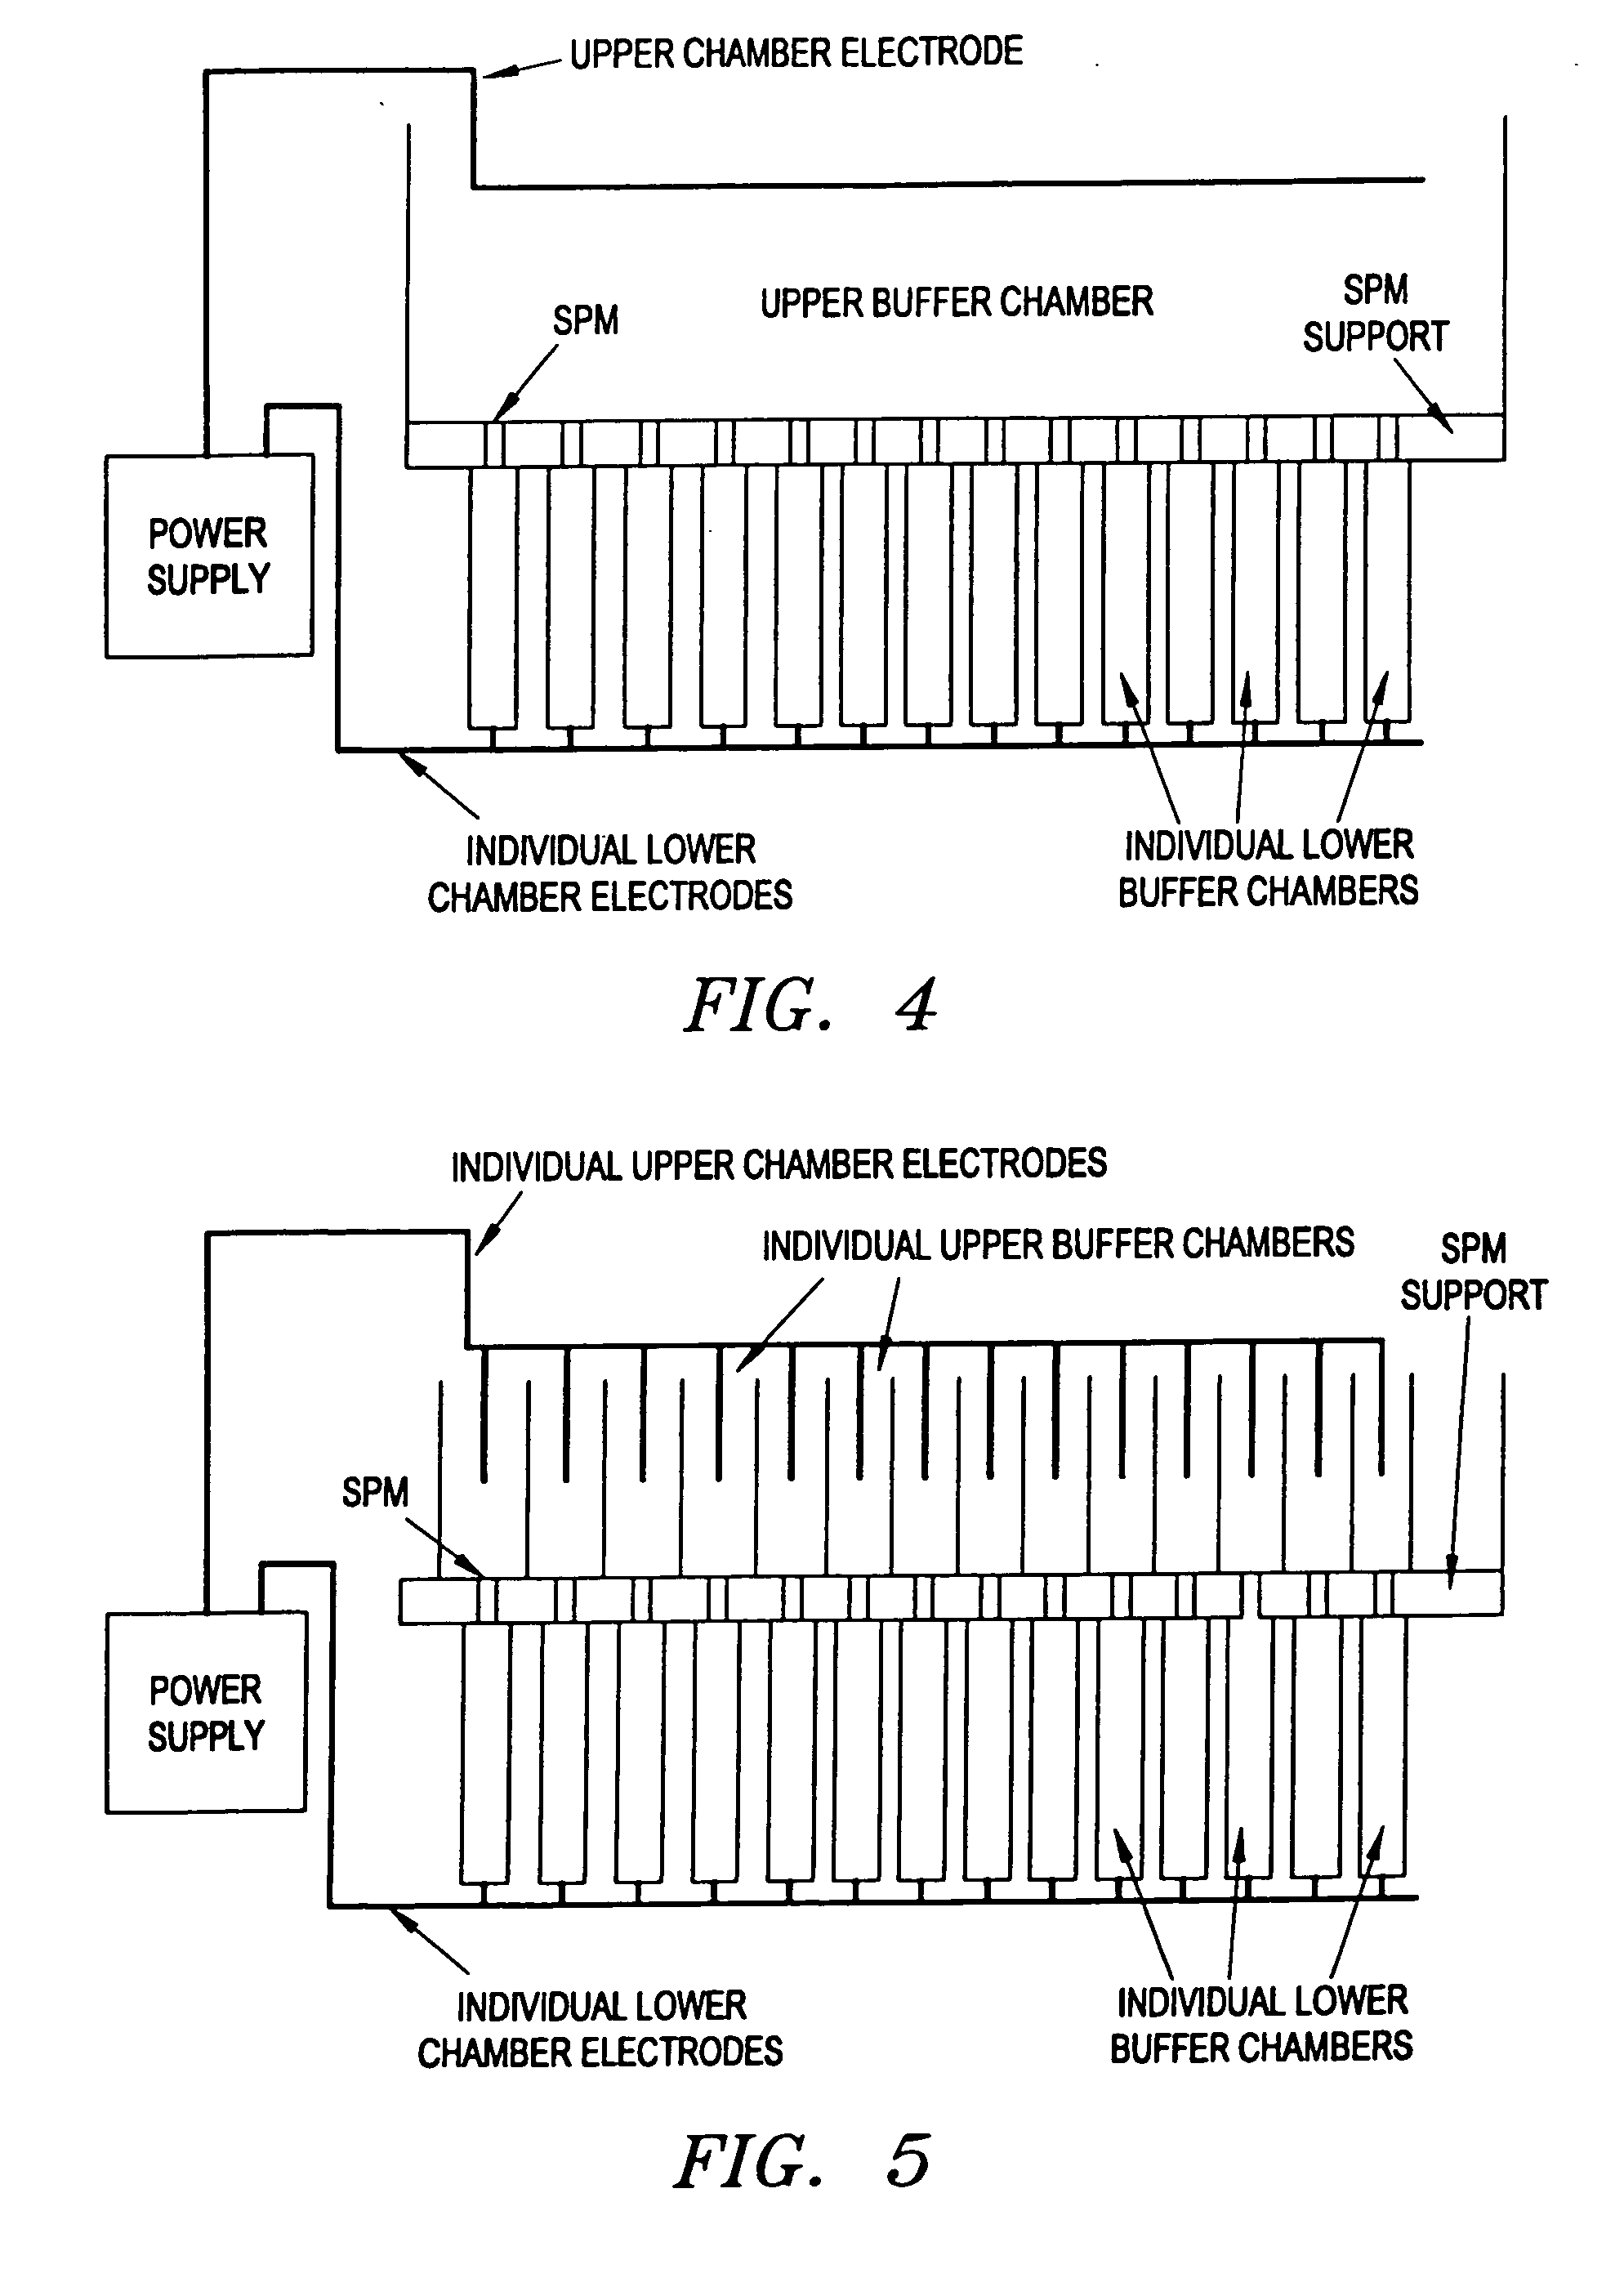 Electronic systems and component devices for macroscopic and microscopic molecular biological reaction, analyses, and diagnostics